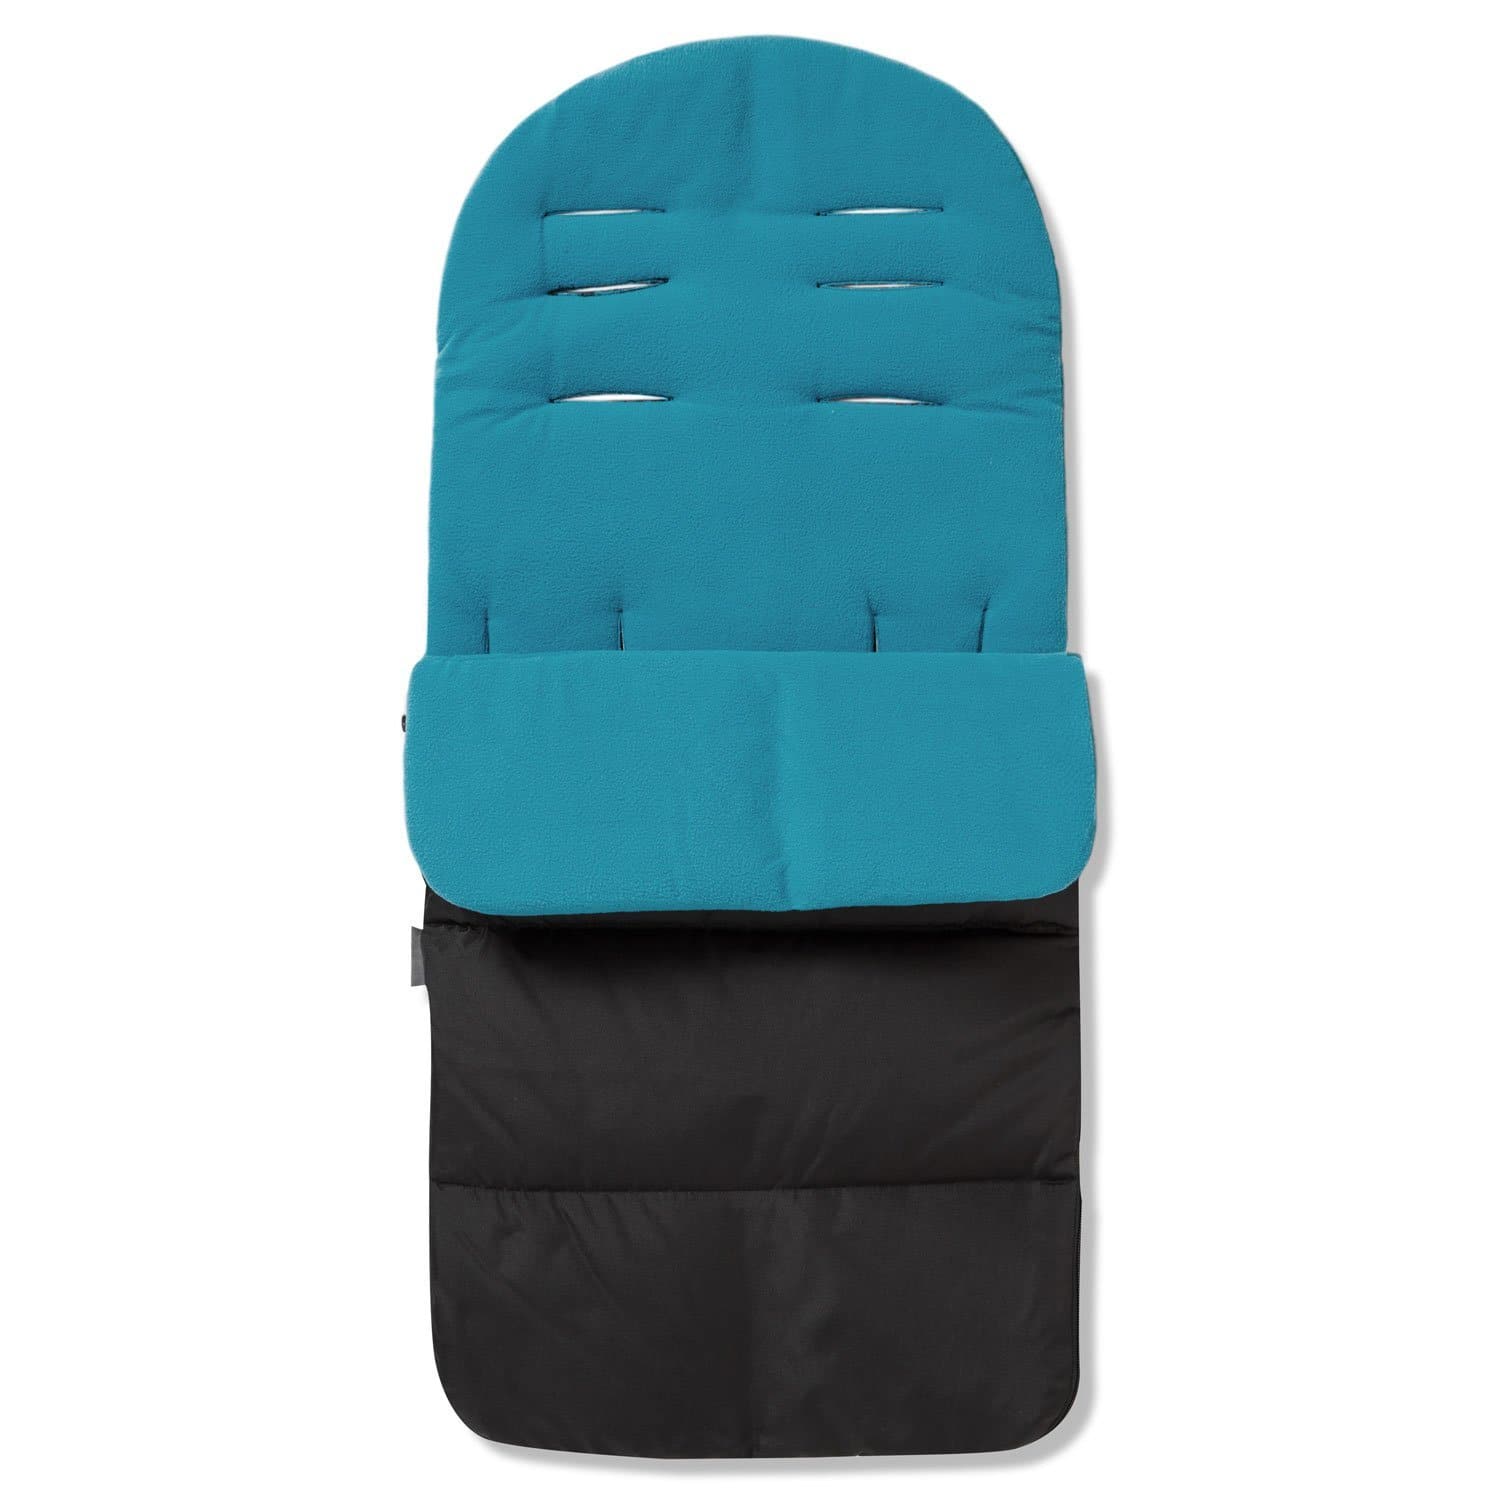 Premium Footmuff / Cosy Toes Compatible with Combi - Ocean Blue / Fits All Models | For Your Little One